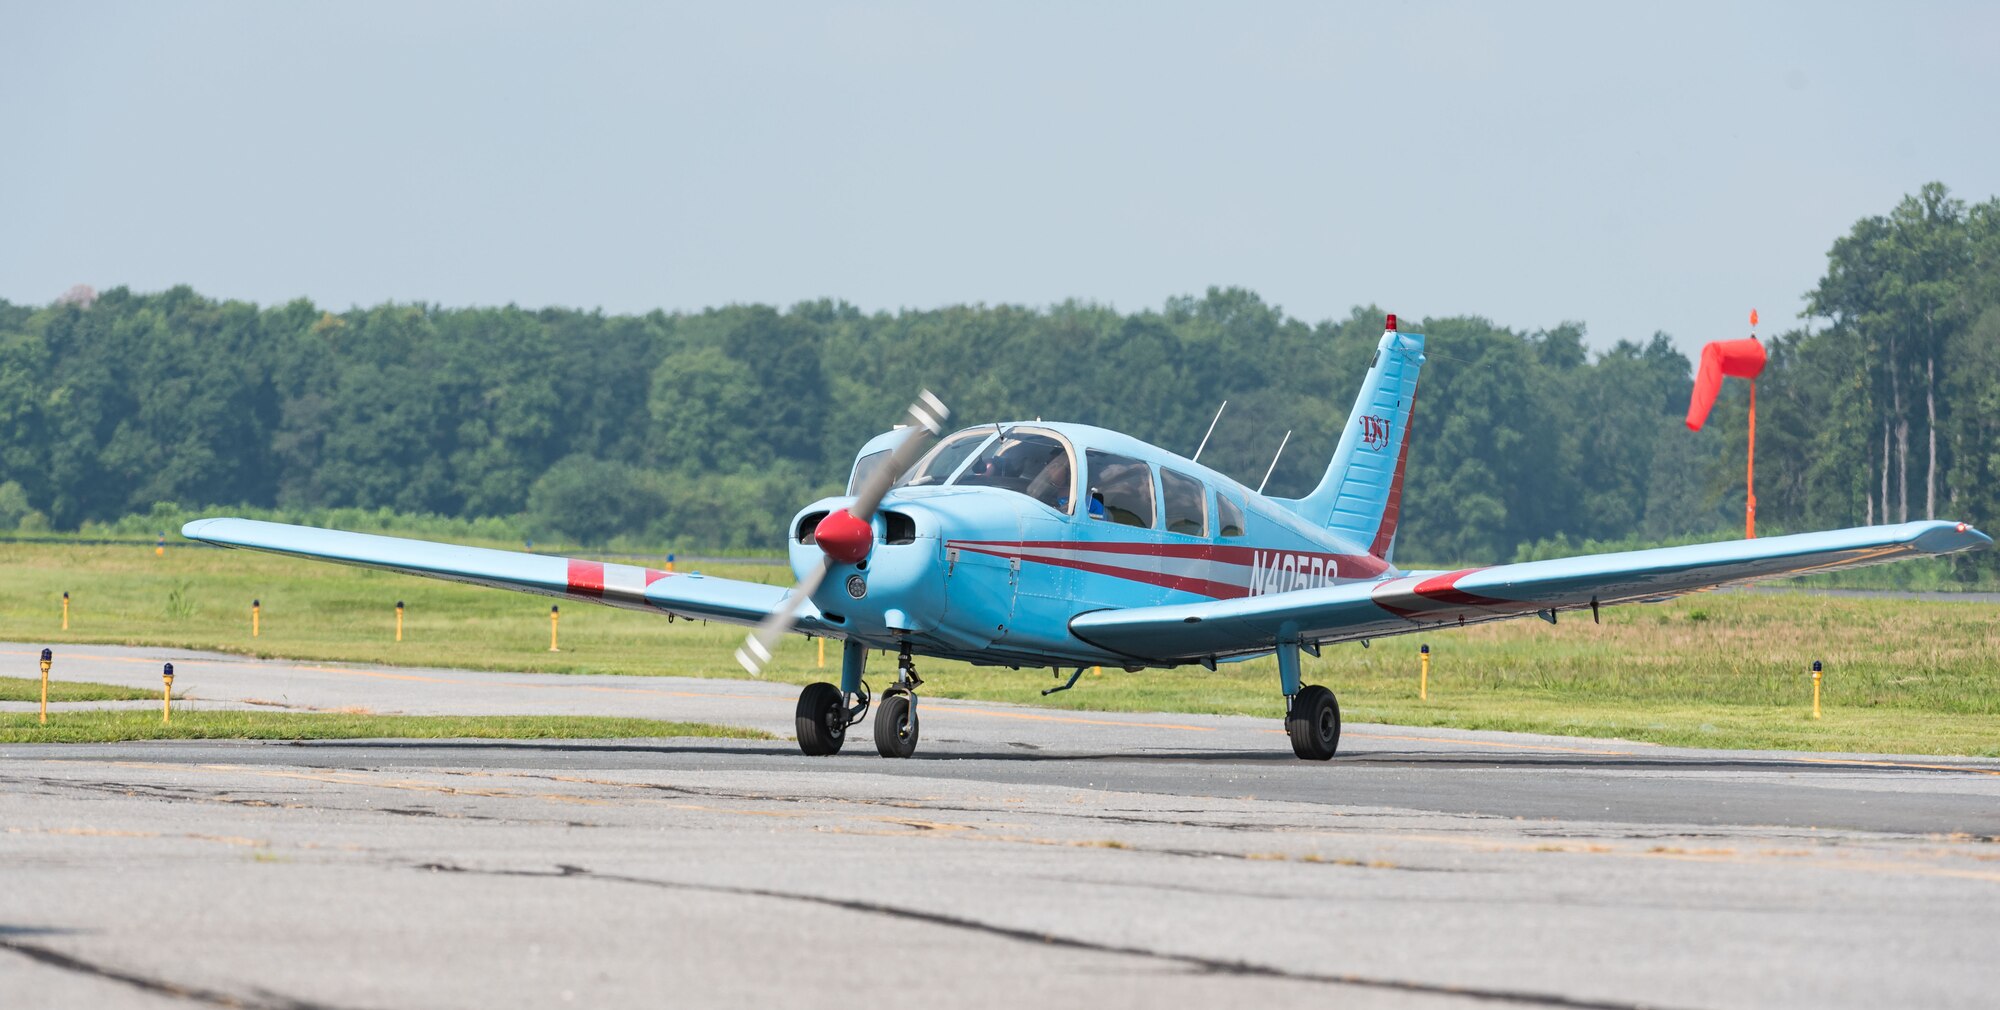 A Piper Warrior aircraft taxis off the runway Aug. 6, 2019, at Delaware Airpark in Cheswold, Del. The Delaware State University aviation program has 10 Piper Warrior aircraft that were used by cadets who attended the Air Force Junior Reserve Officers’ Training Corps Summer Flight Academy held at DSU in Dover, June 17 through August 8, 2019. (U.S. Air Force photo by Roland Balik)